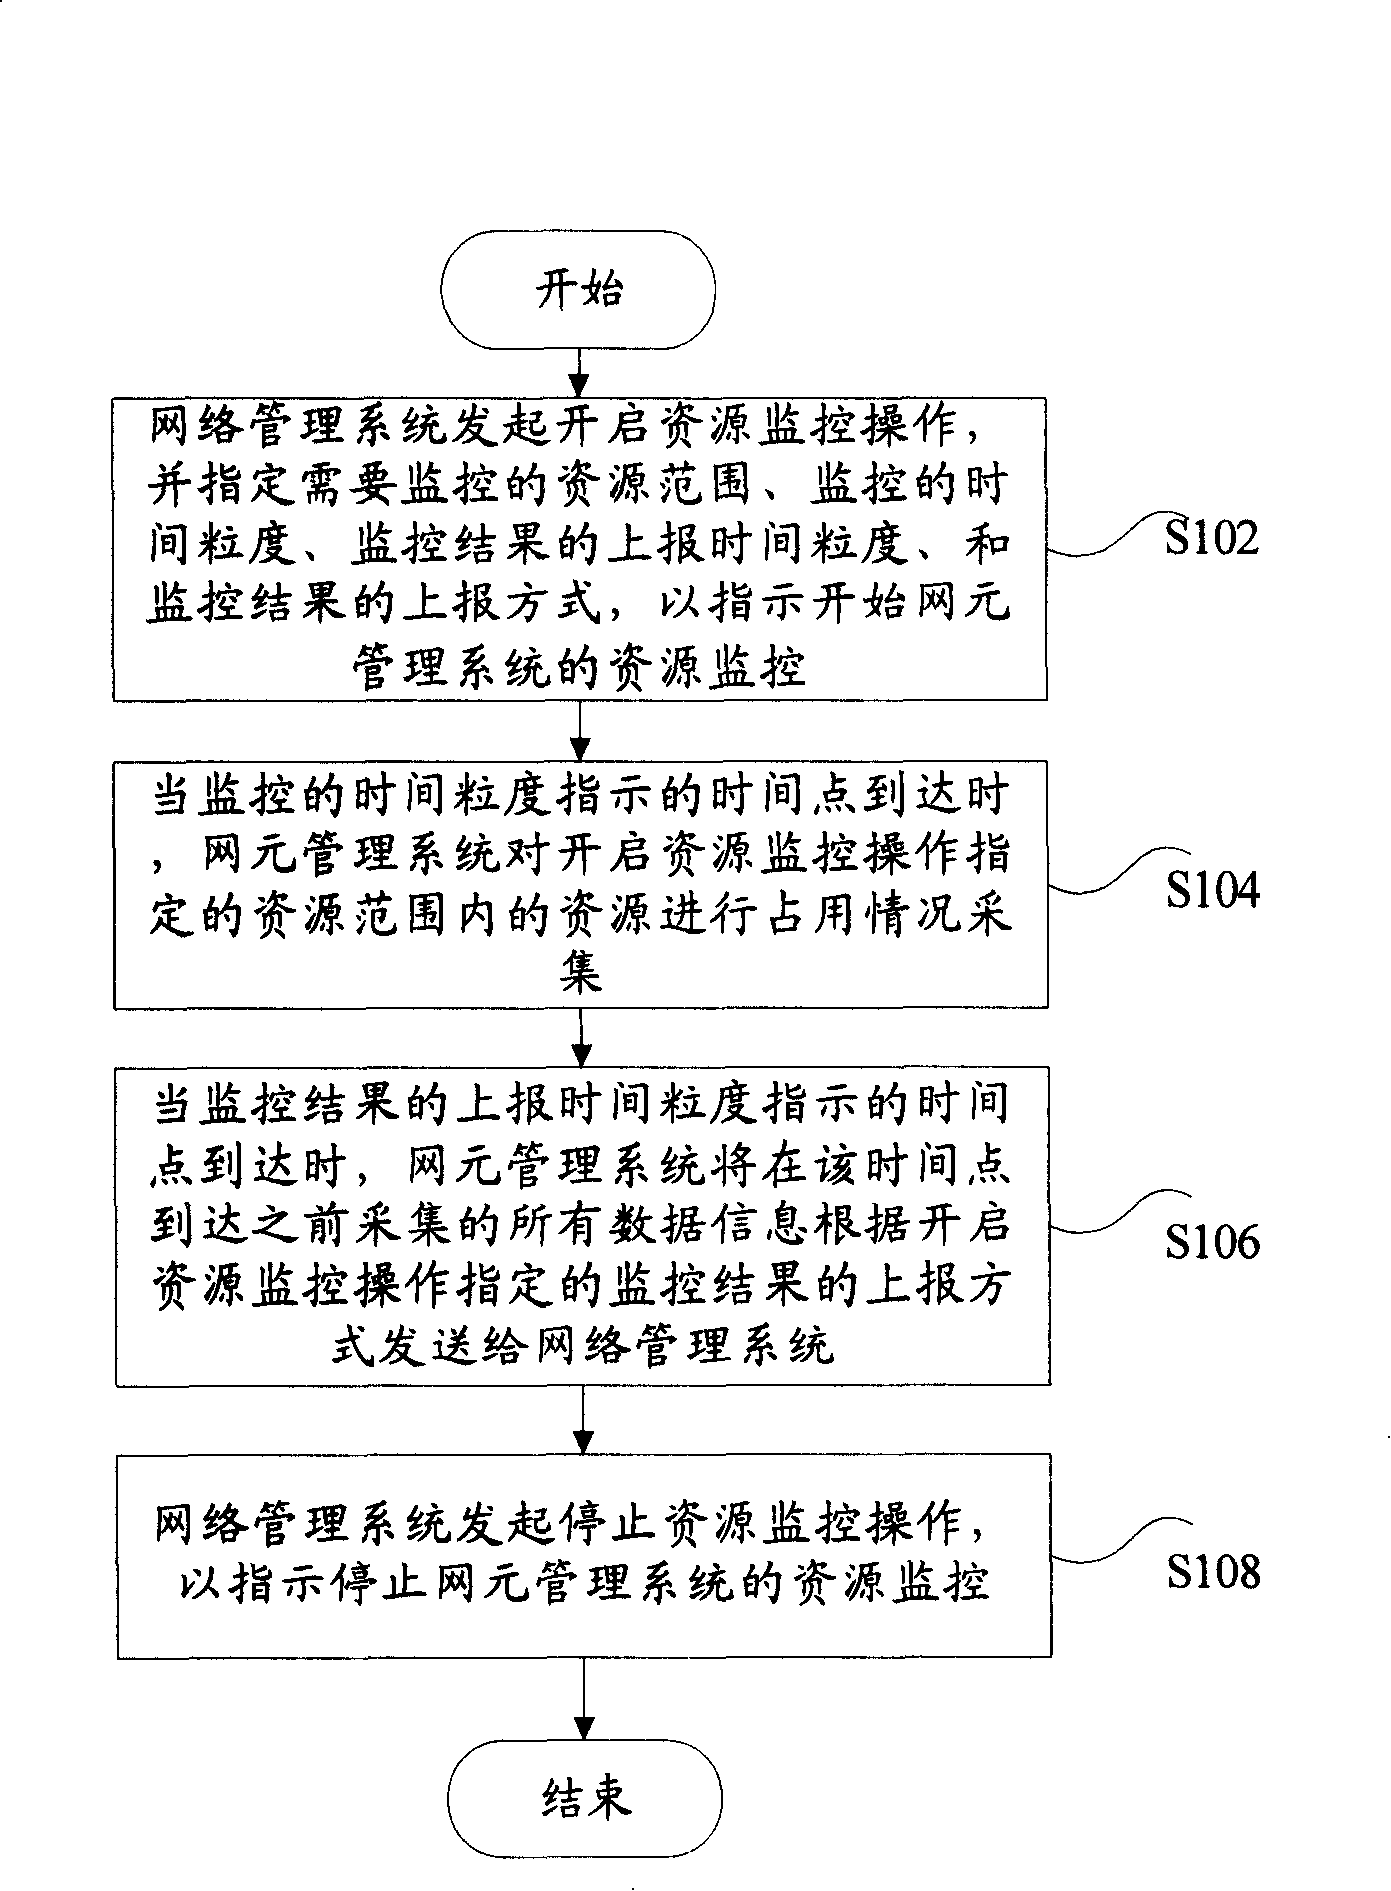 Method and apparatus for resource supervising